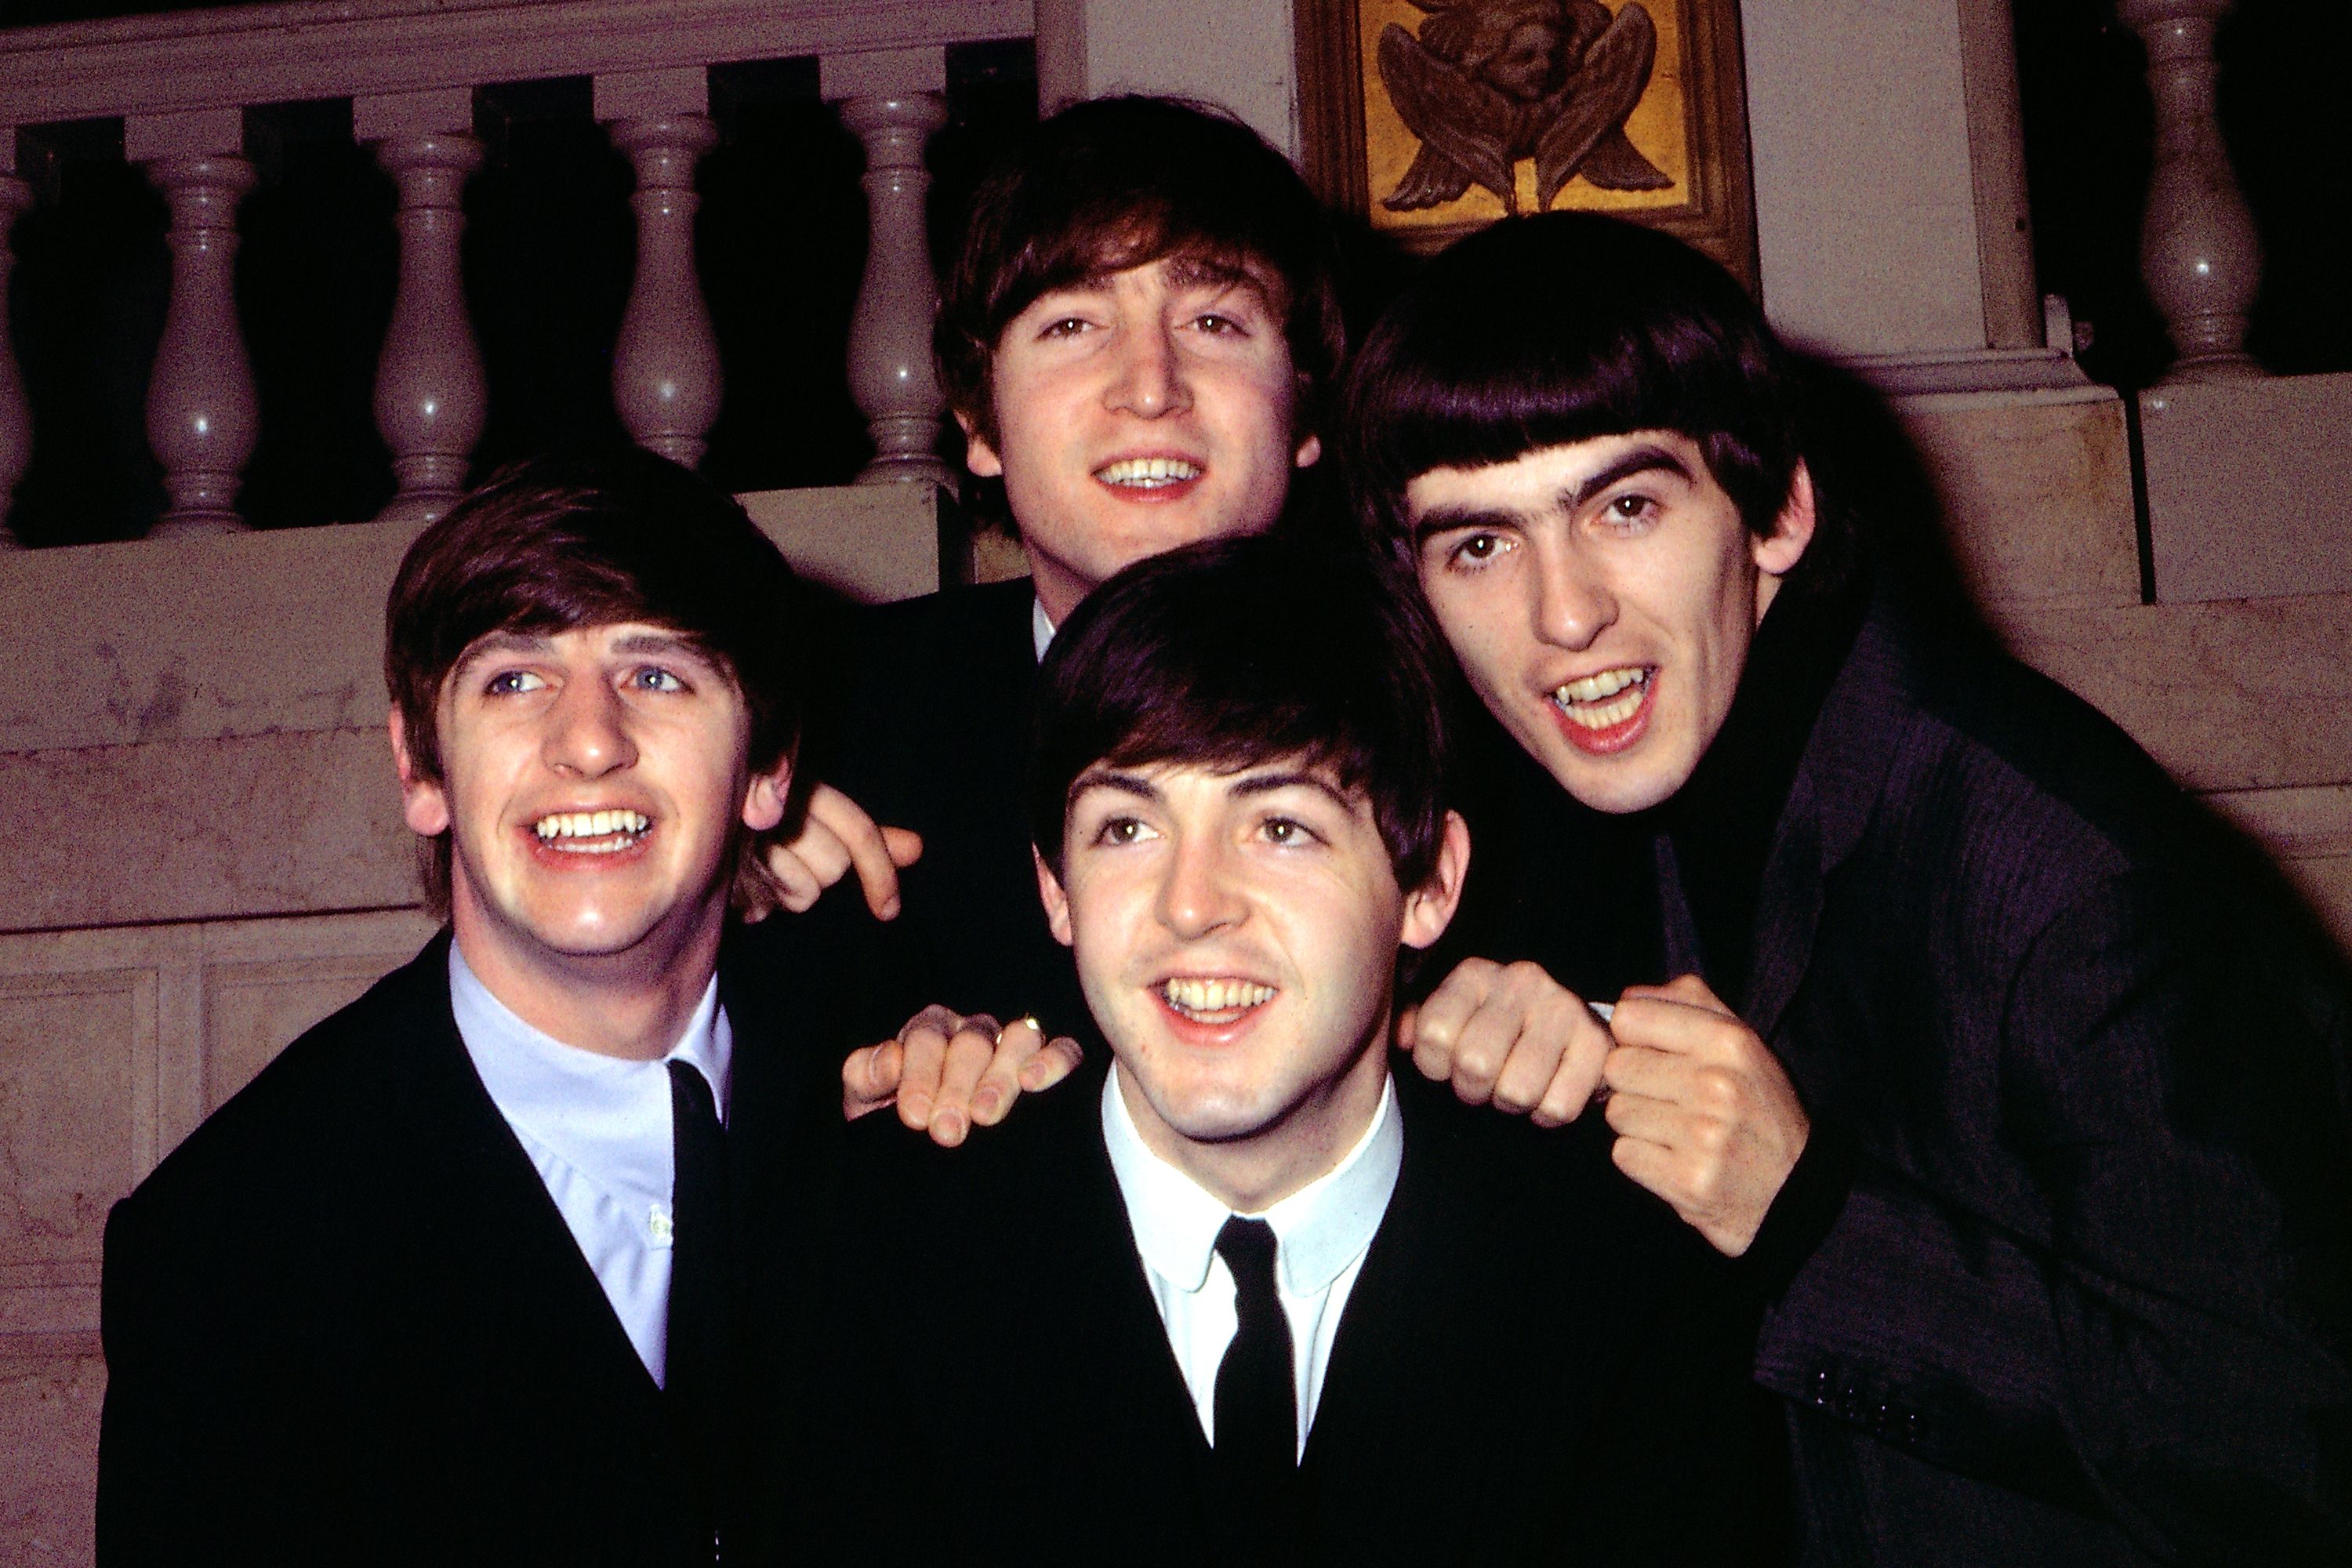 Now and Then: listen to the 'final' Beatles song, The Beatles